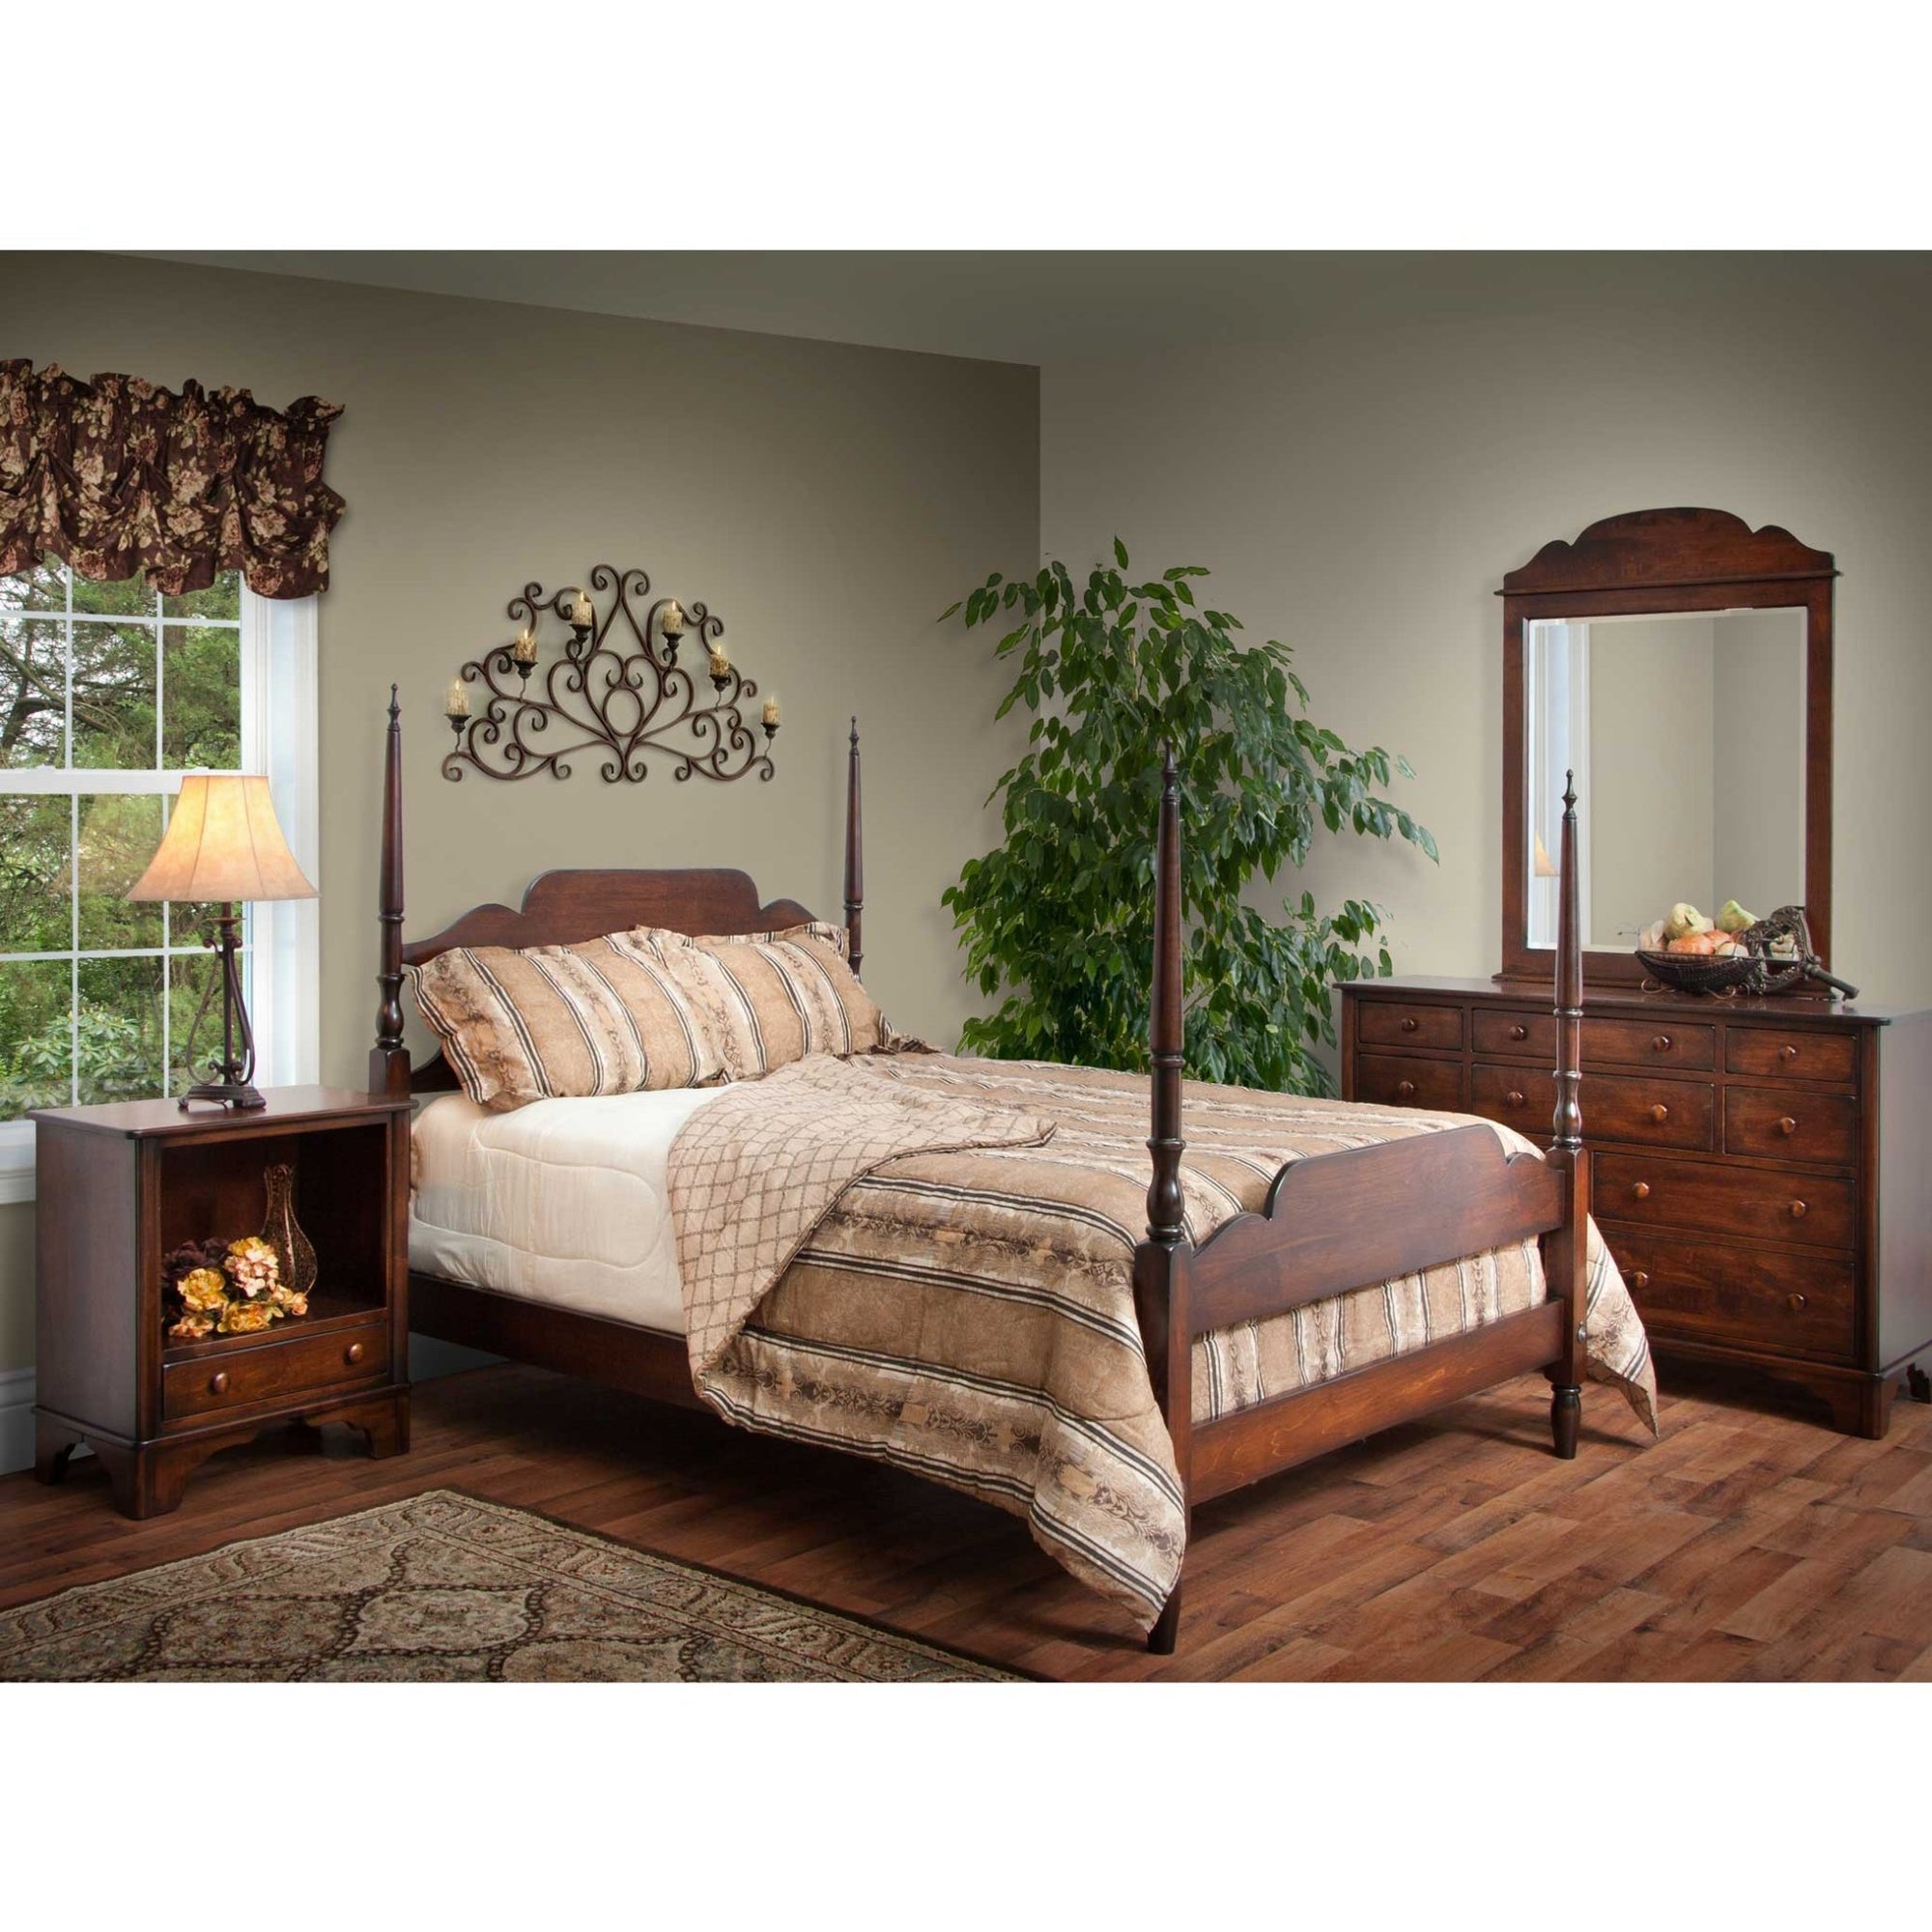 Amish New Amsterdam 4pc Poster Bedroom Set - snyders.furniture